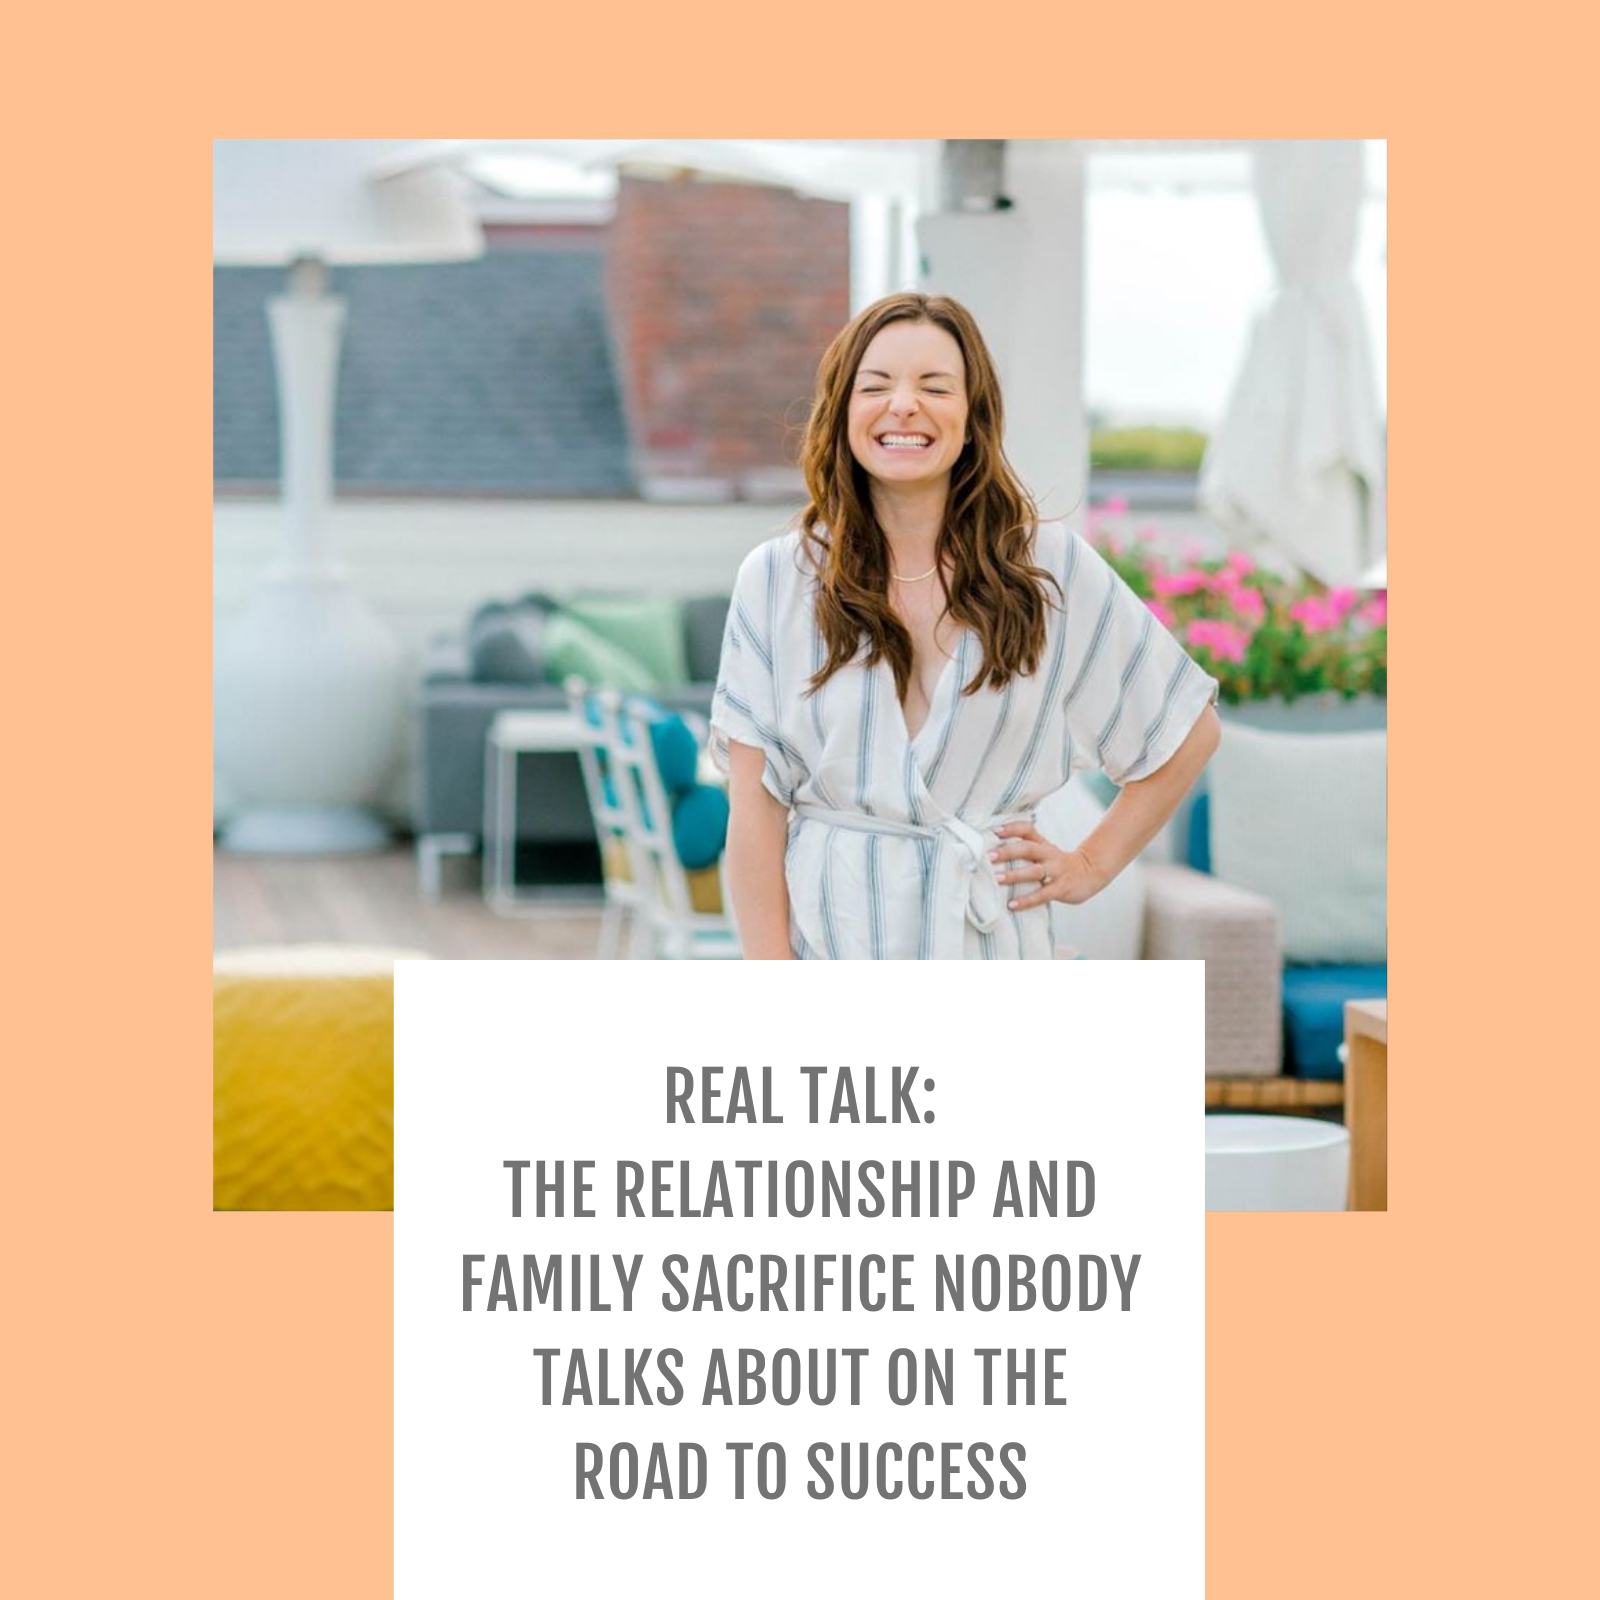 Episode #057 Real Talk: The relationship and family sacrifice nobody talks about on the road to success